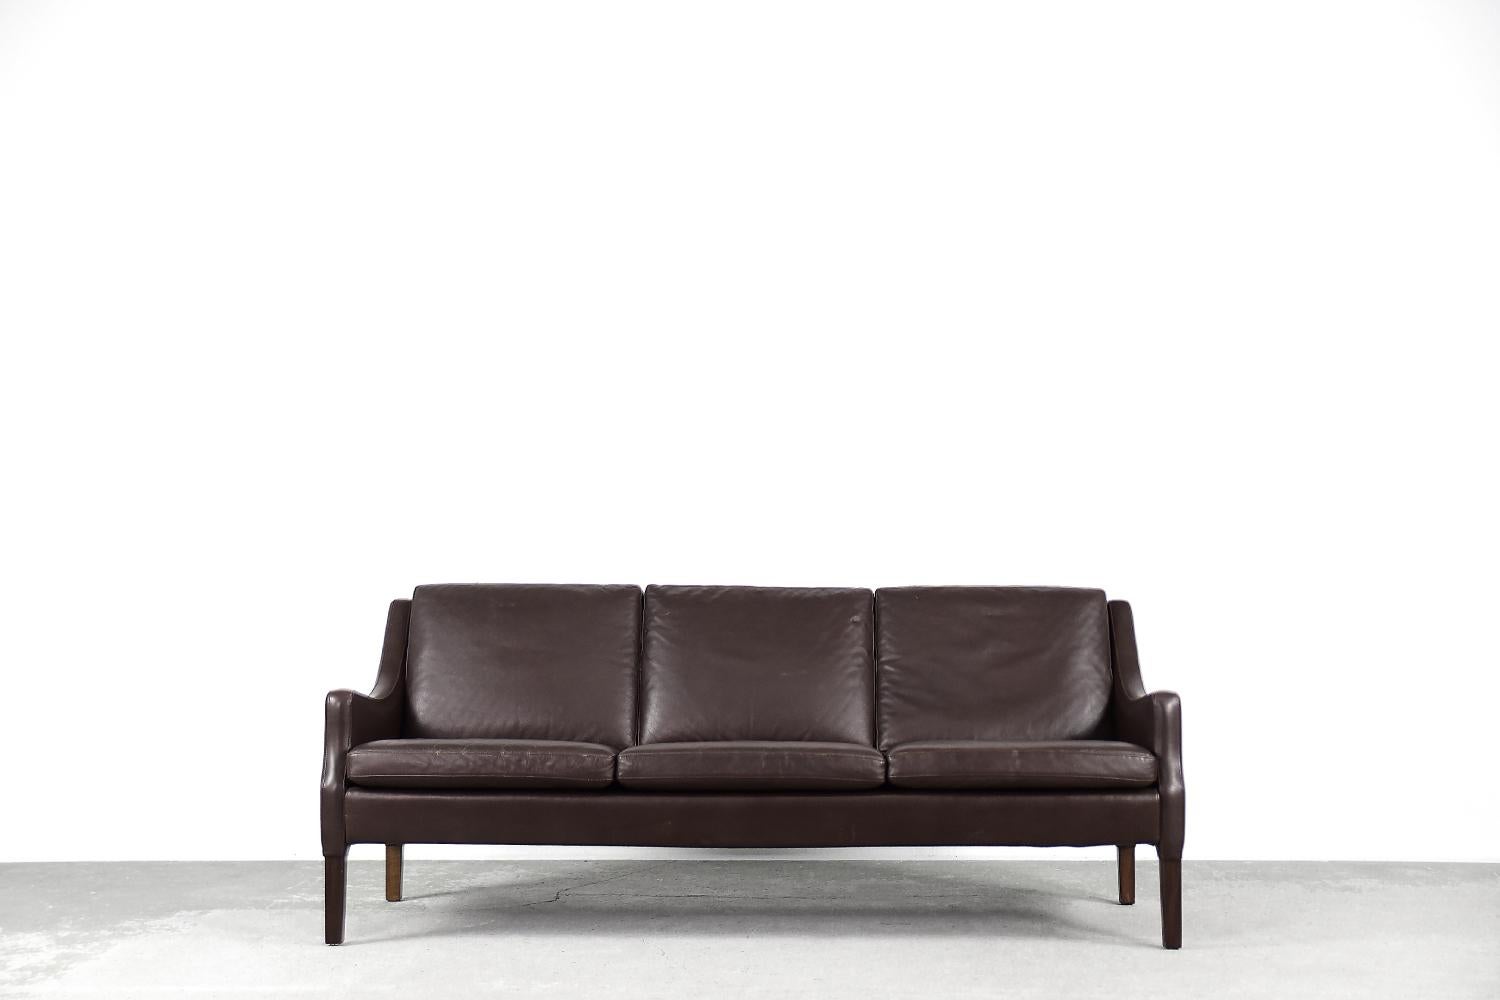 This three-seater sofa was made in Denmark during the 1960s. The sofa is completely upholstered in natural leather in a deep dark chocolate color. Comfortable, loosely placed cushions ensure comfort and convenience during use. The legs are made of